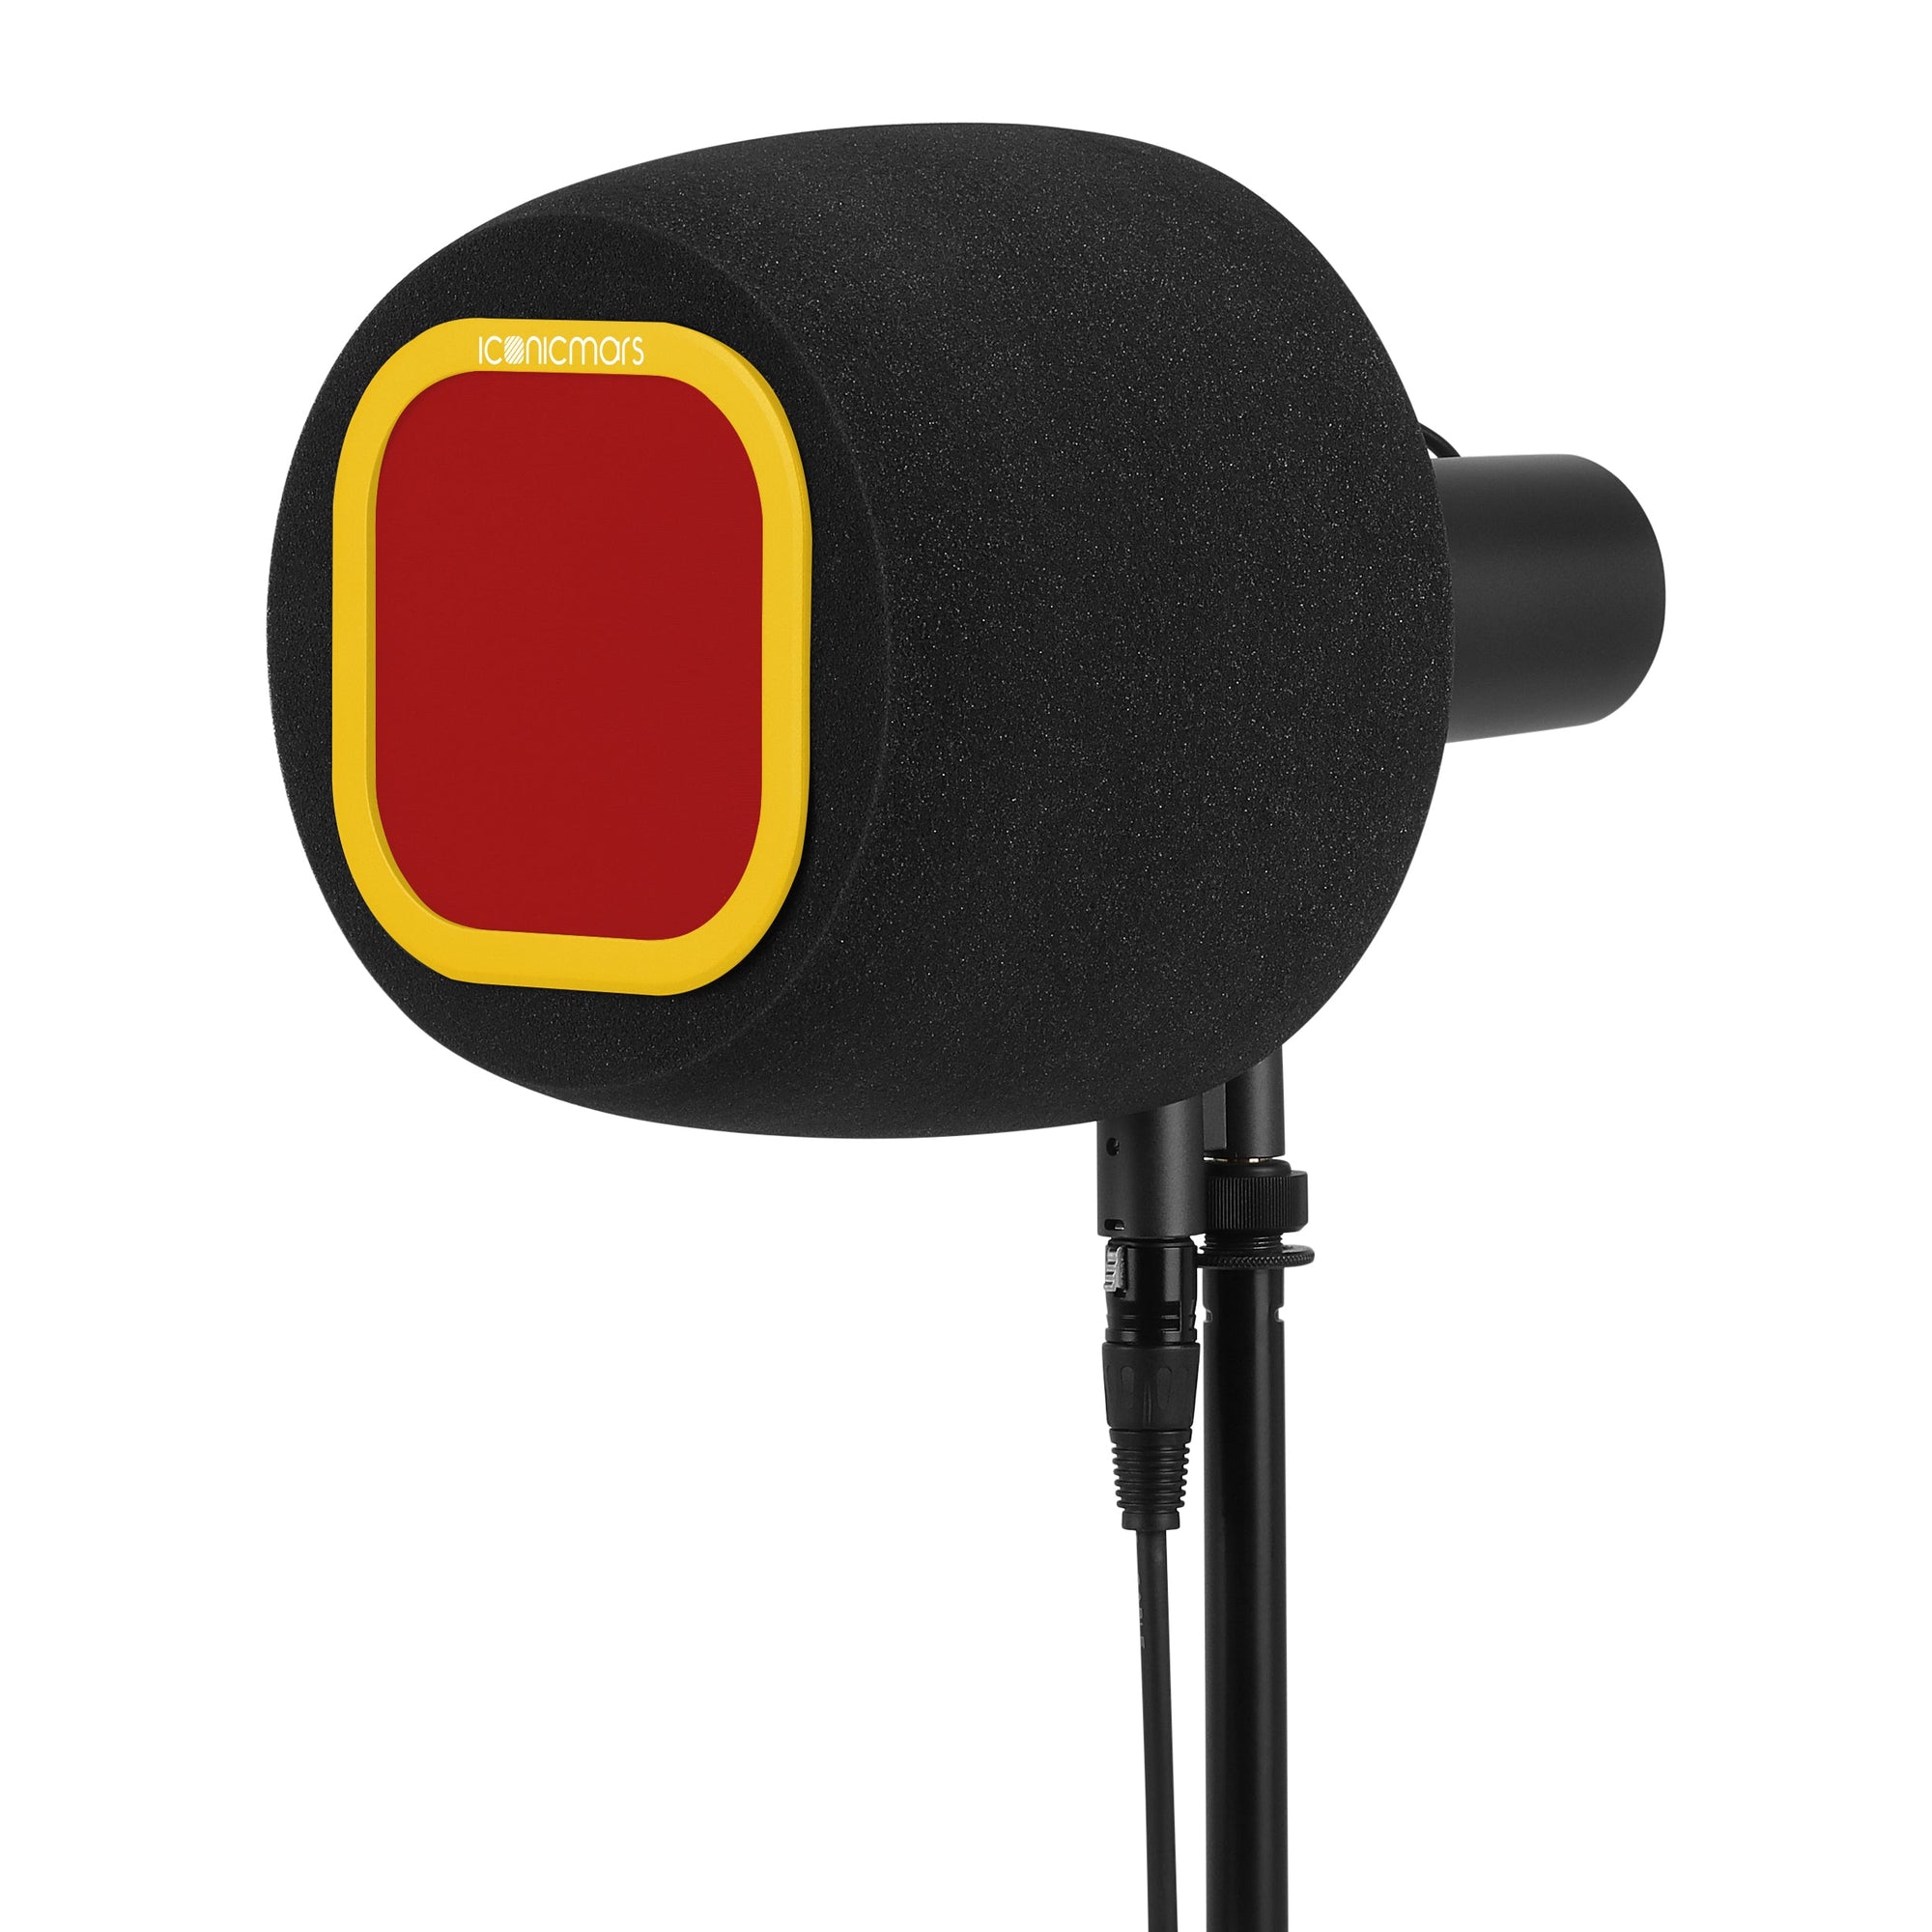 Comet X7B side with pop filter stand with eyeball like design for front facing microphone like Shure SM7B  -- K&M